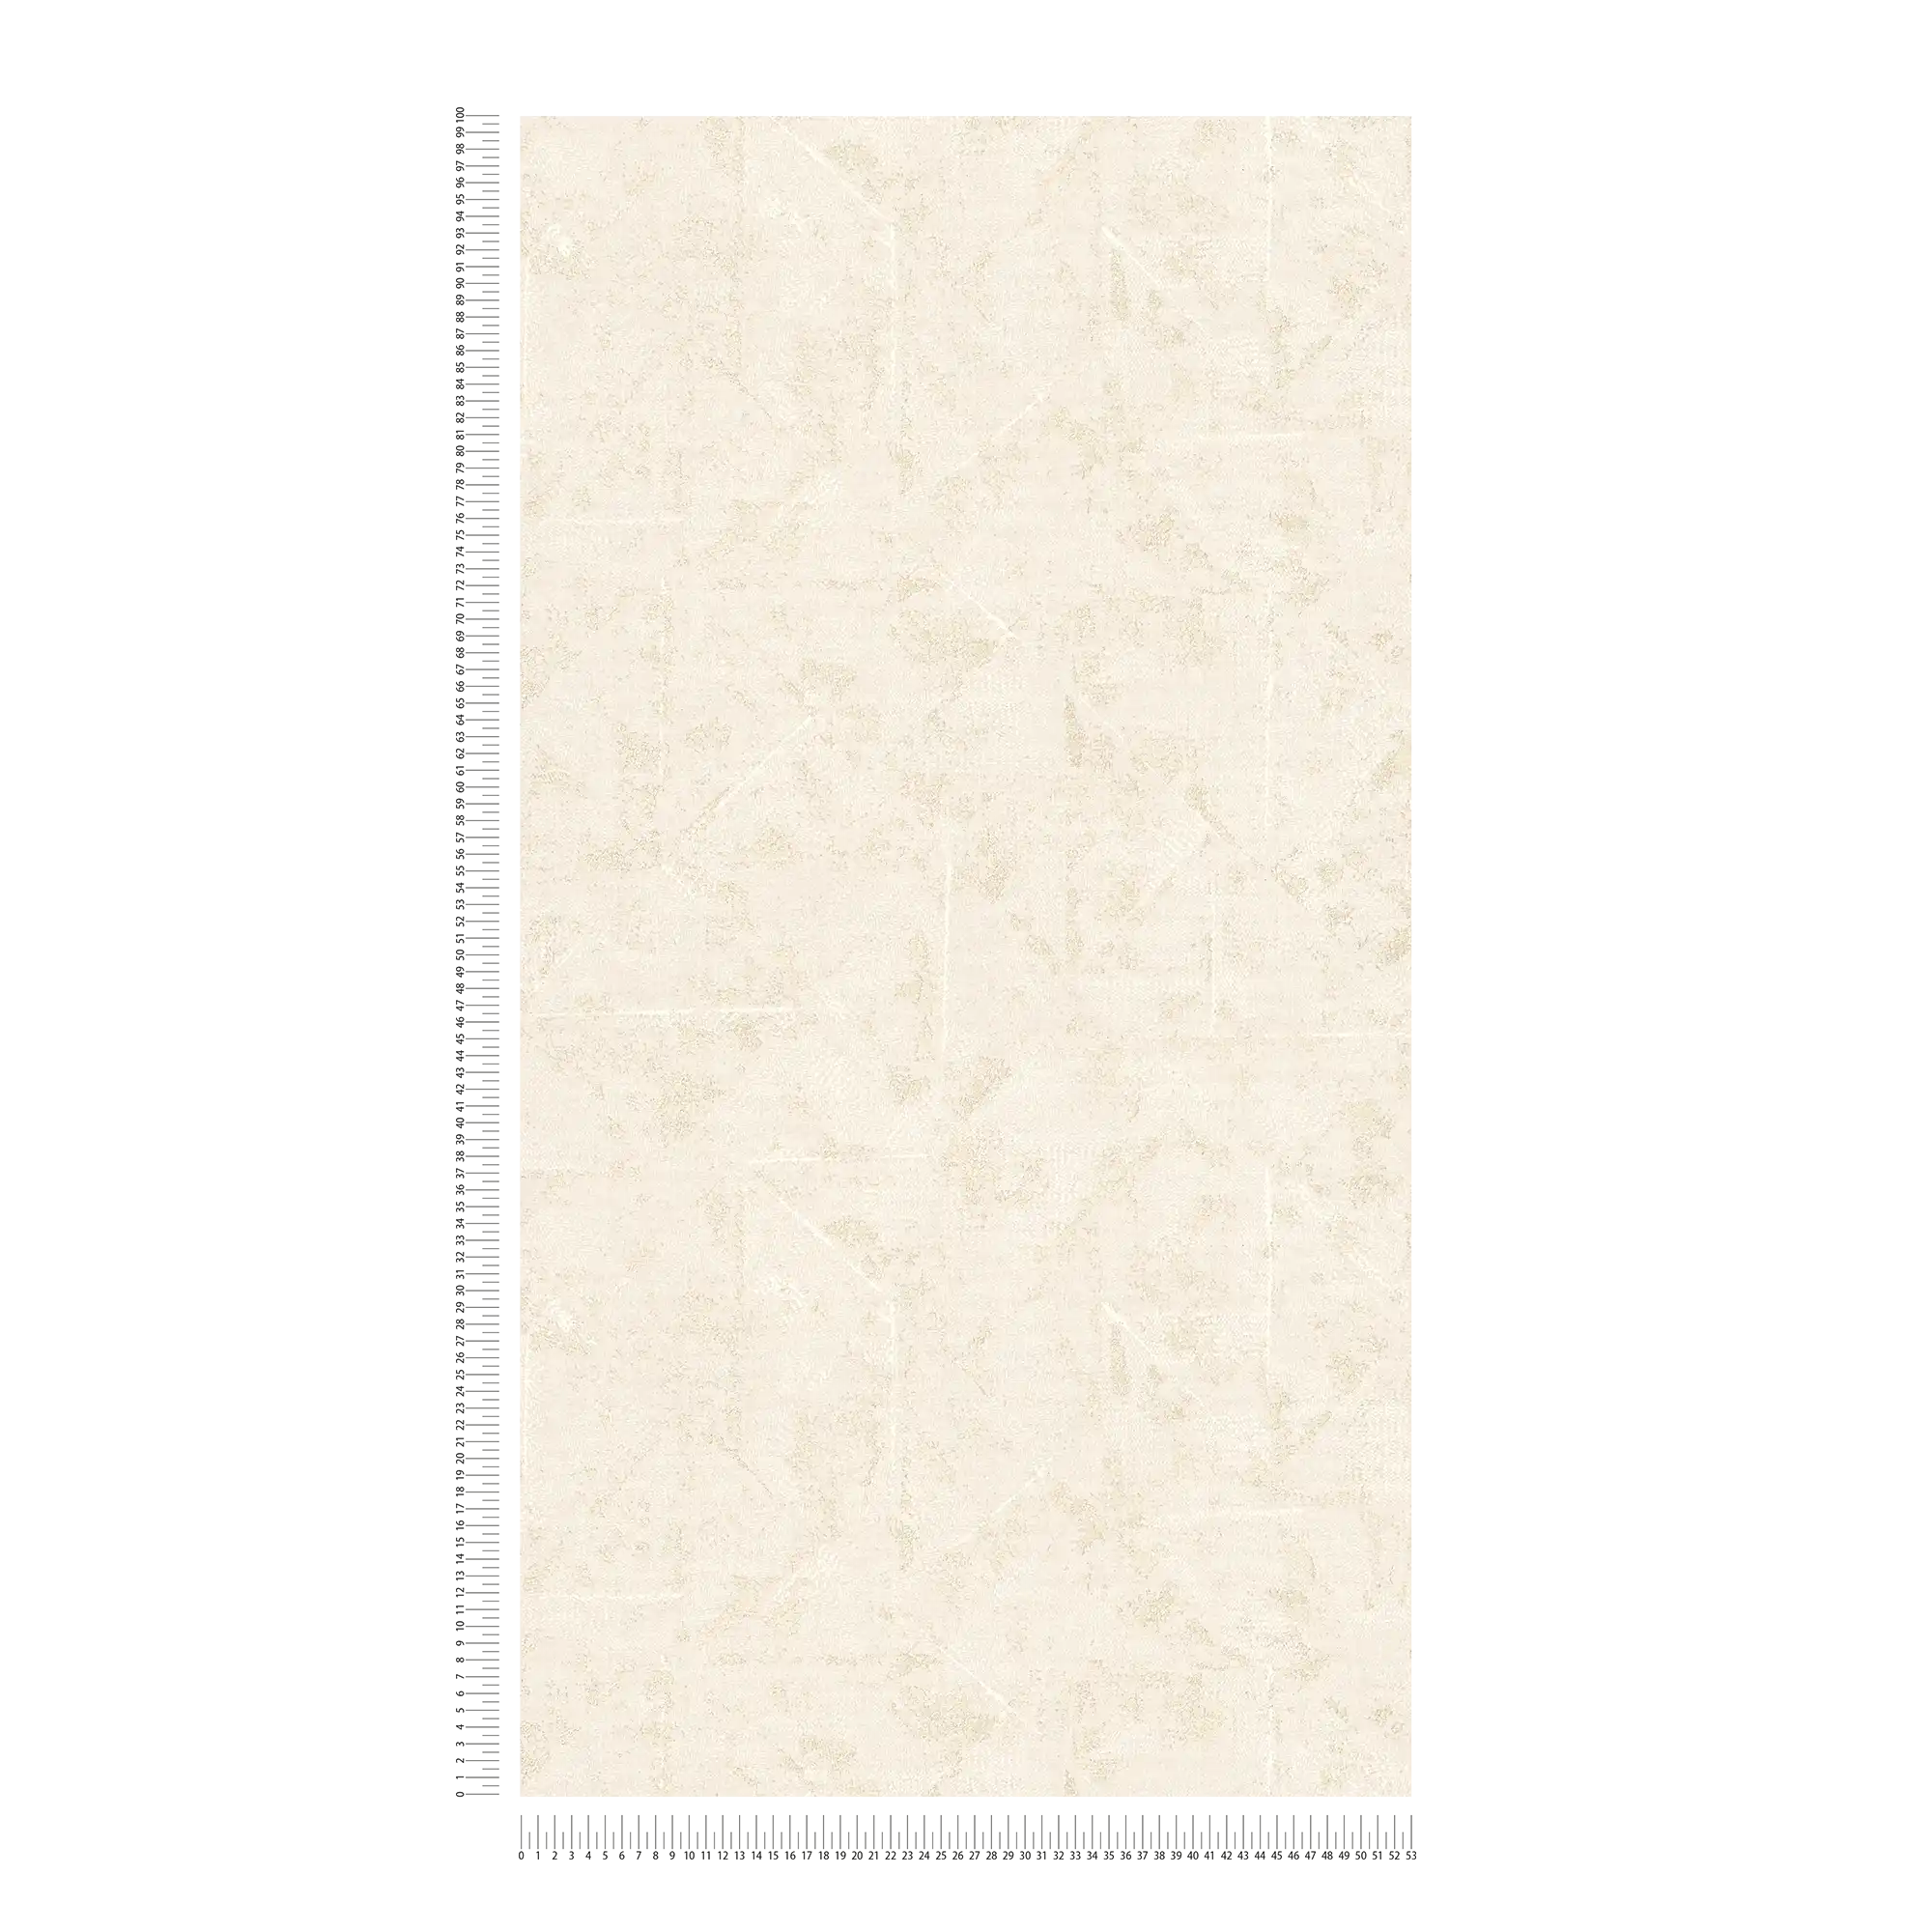             wallpaper asymmetrical patterned, used look - cream, white, gold
        